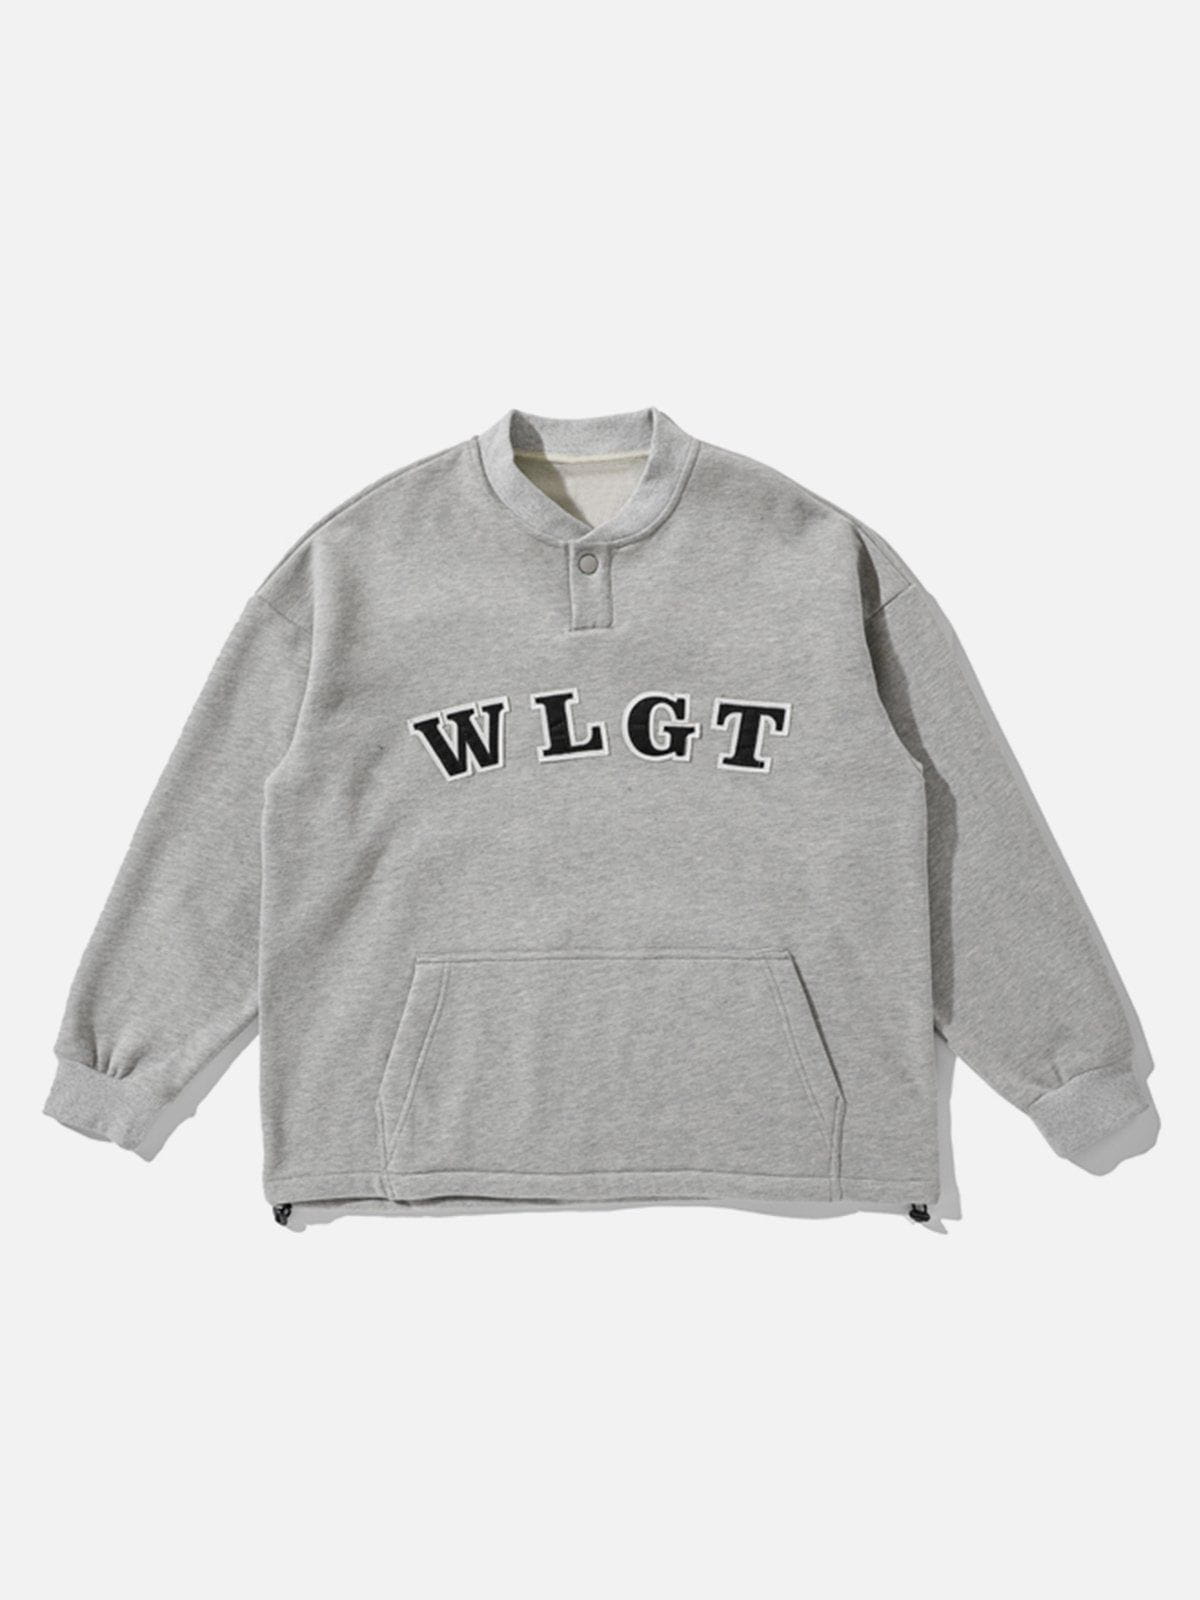 LUXENFY™ - WLGT Labeling Sweatshirt luxenfy.com